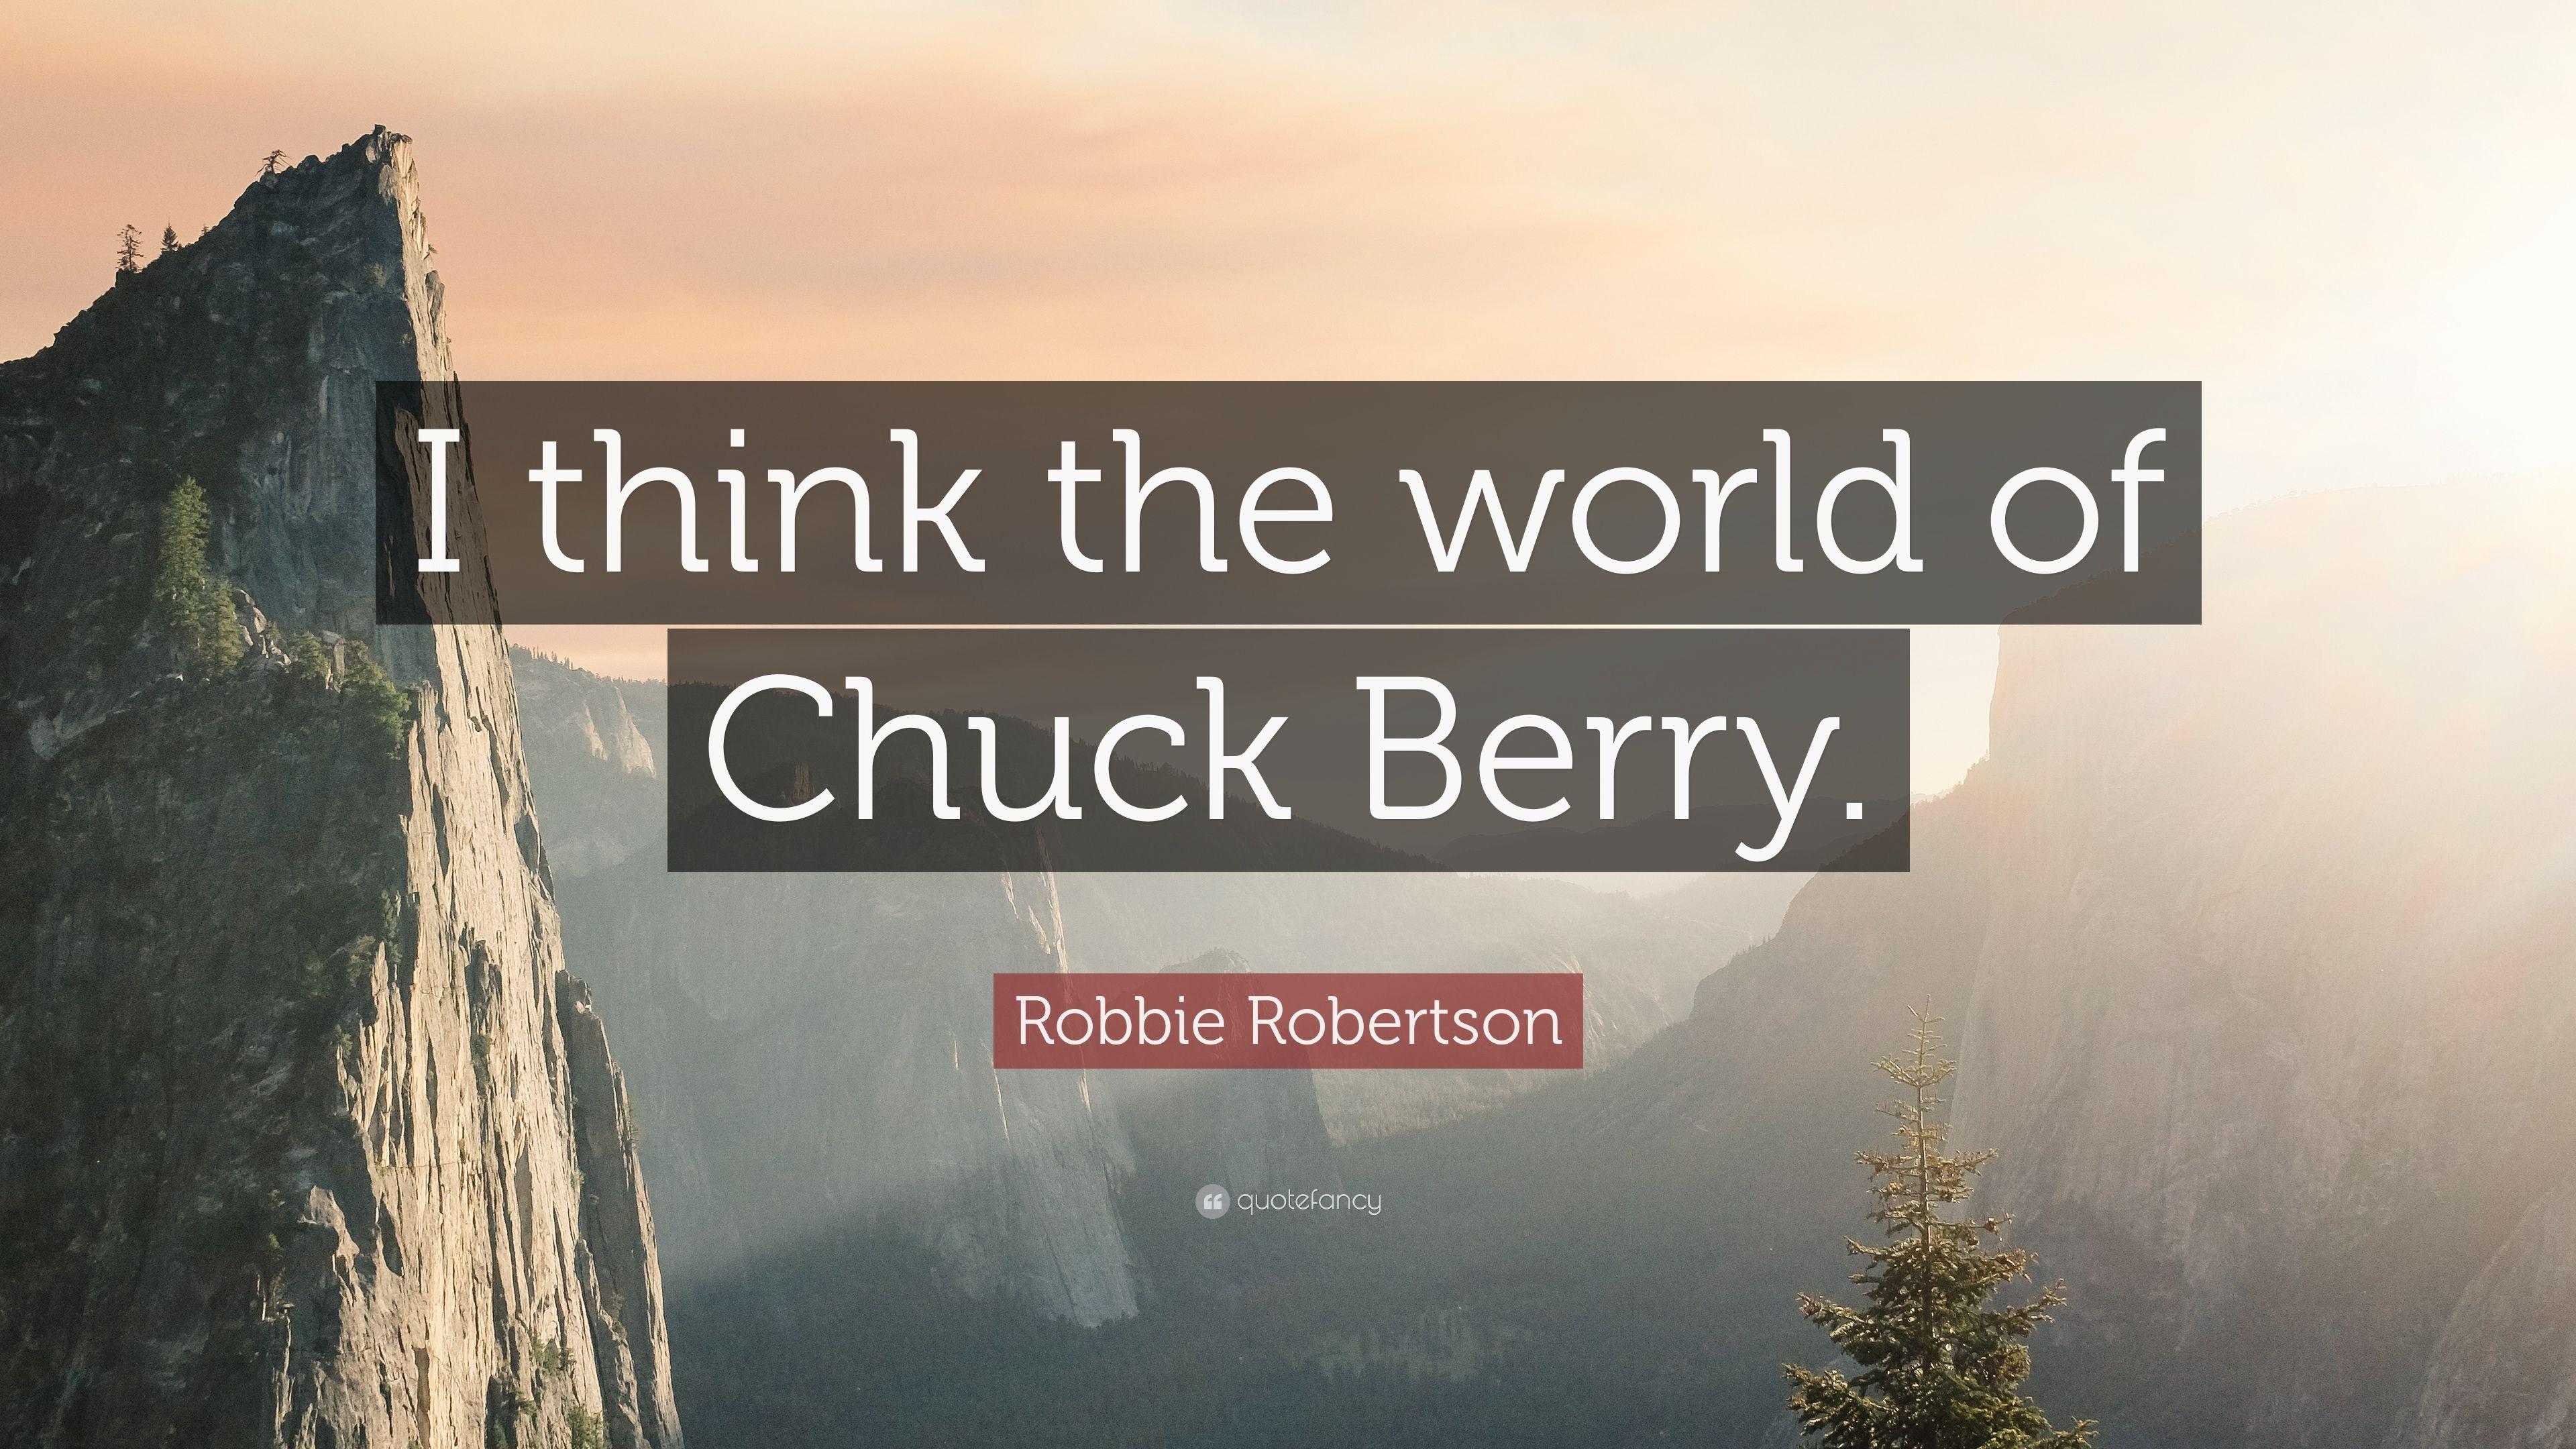 Robbie Robertson Quote: “I think the world of Chuck Berry.” 7